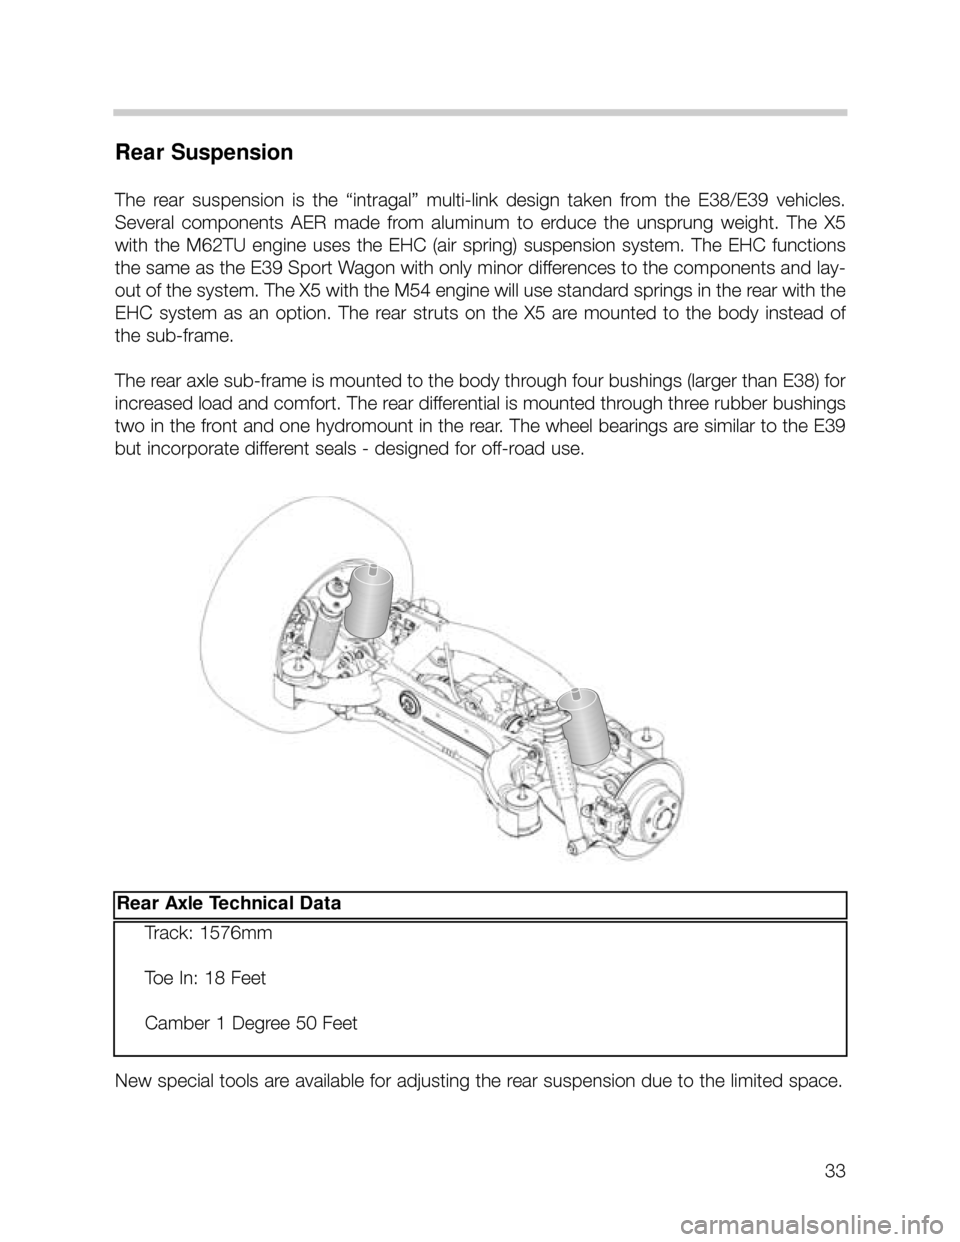 BMW X5 2003 E53 Workshop Manual 33
Rear Suspension
The  rear  suspension  is  the  “intragal”  multi-link  design  taken  from  the  E38/E39  vehicles.
Several  components  AER  made  from  aluminum  to  erduce  the  unsprung  w